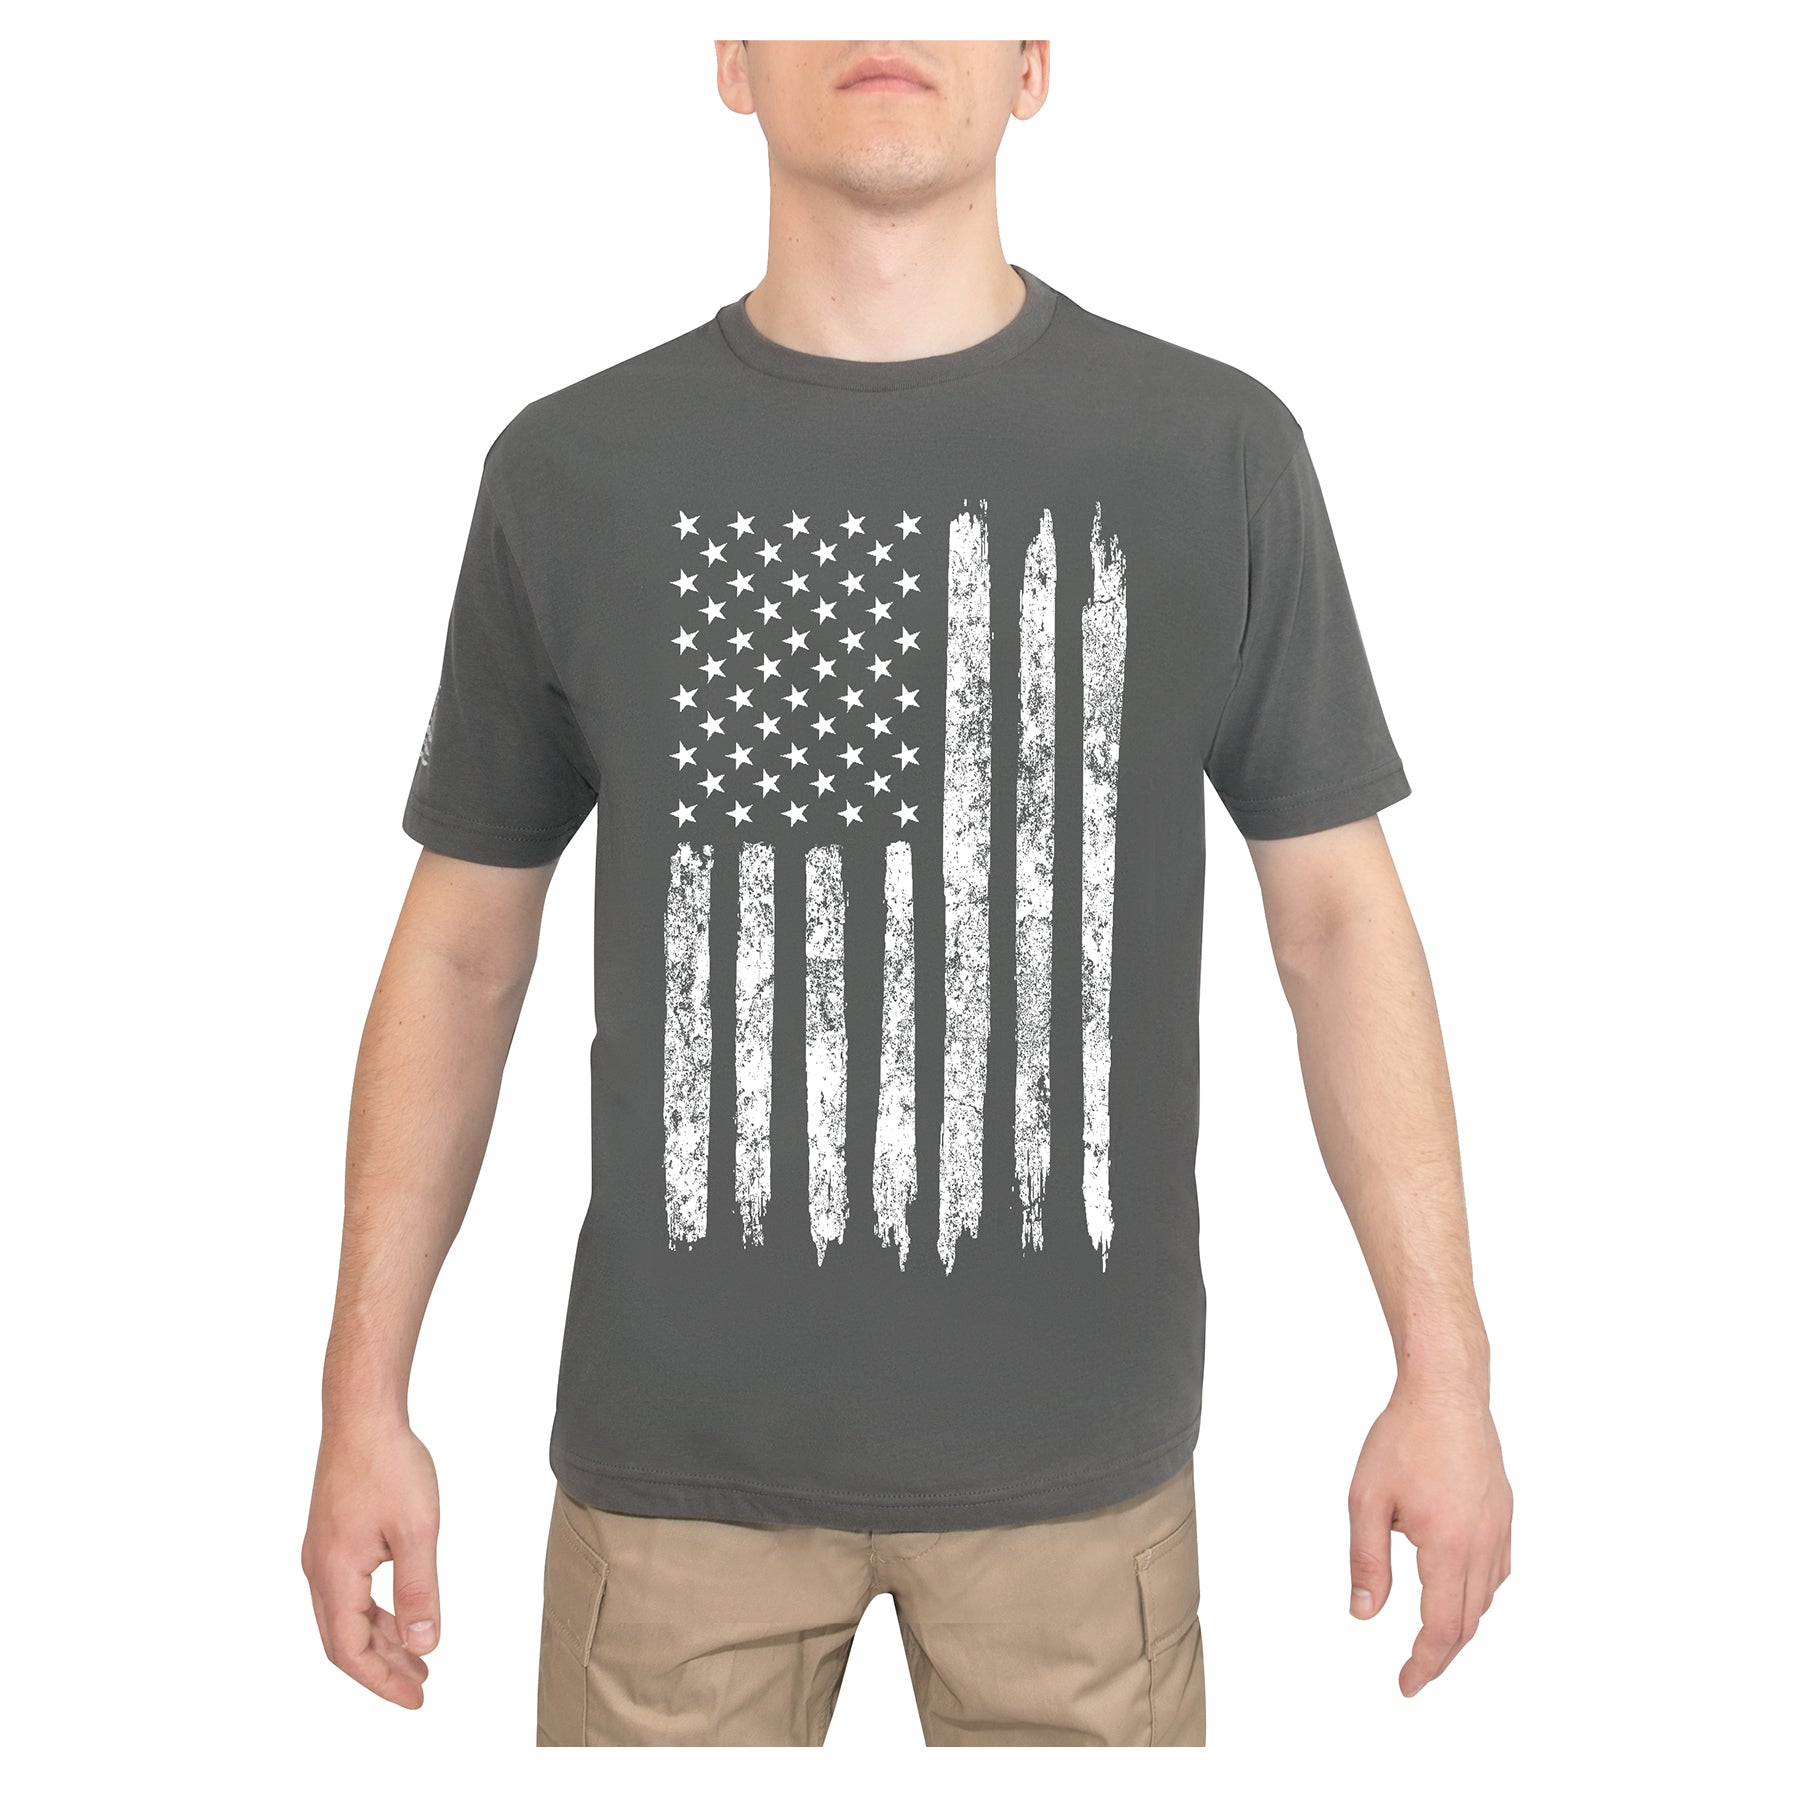 Rothco Distressed US Flag Athletic Fit T-Shirt - Tactical Choice Plus